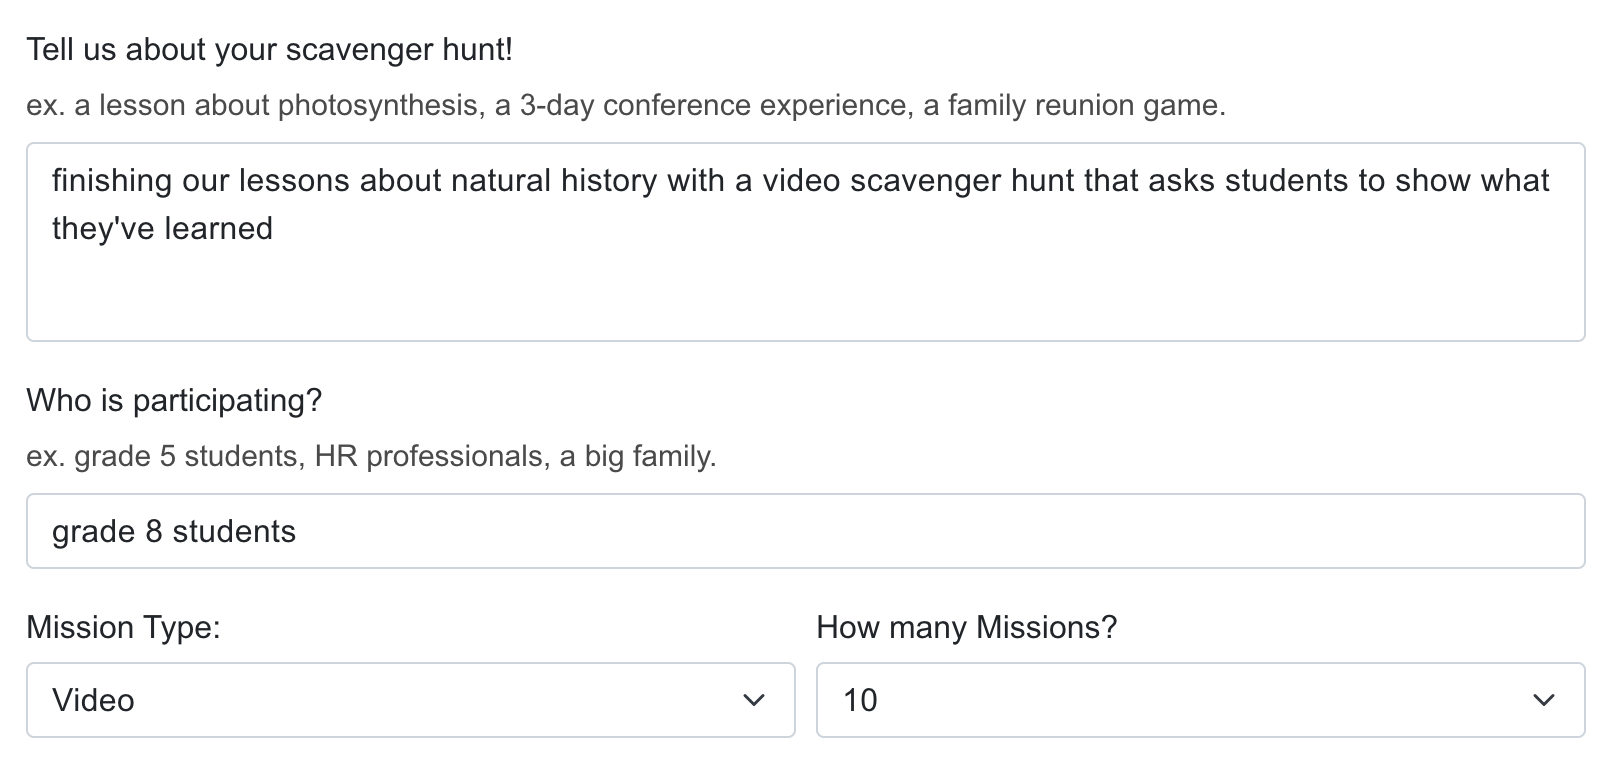 Tell us about your scavenger hunt: finishing our lessons about natural history with a video scavenger hunt that asks students to show what they've learned. Who is participating? grade 8 students.